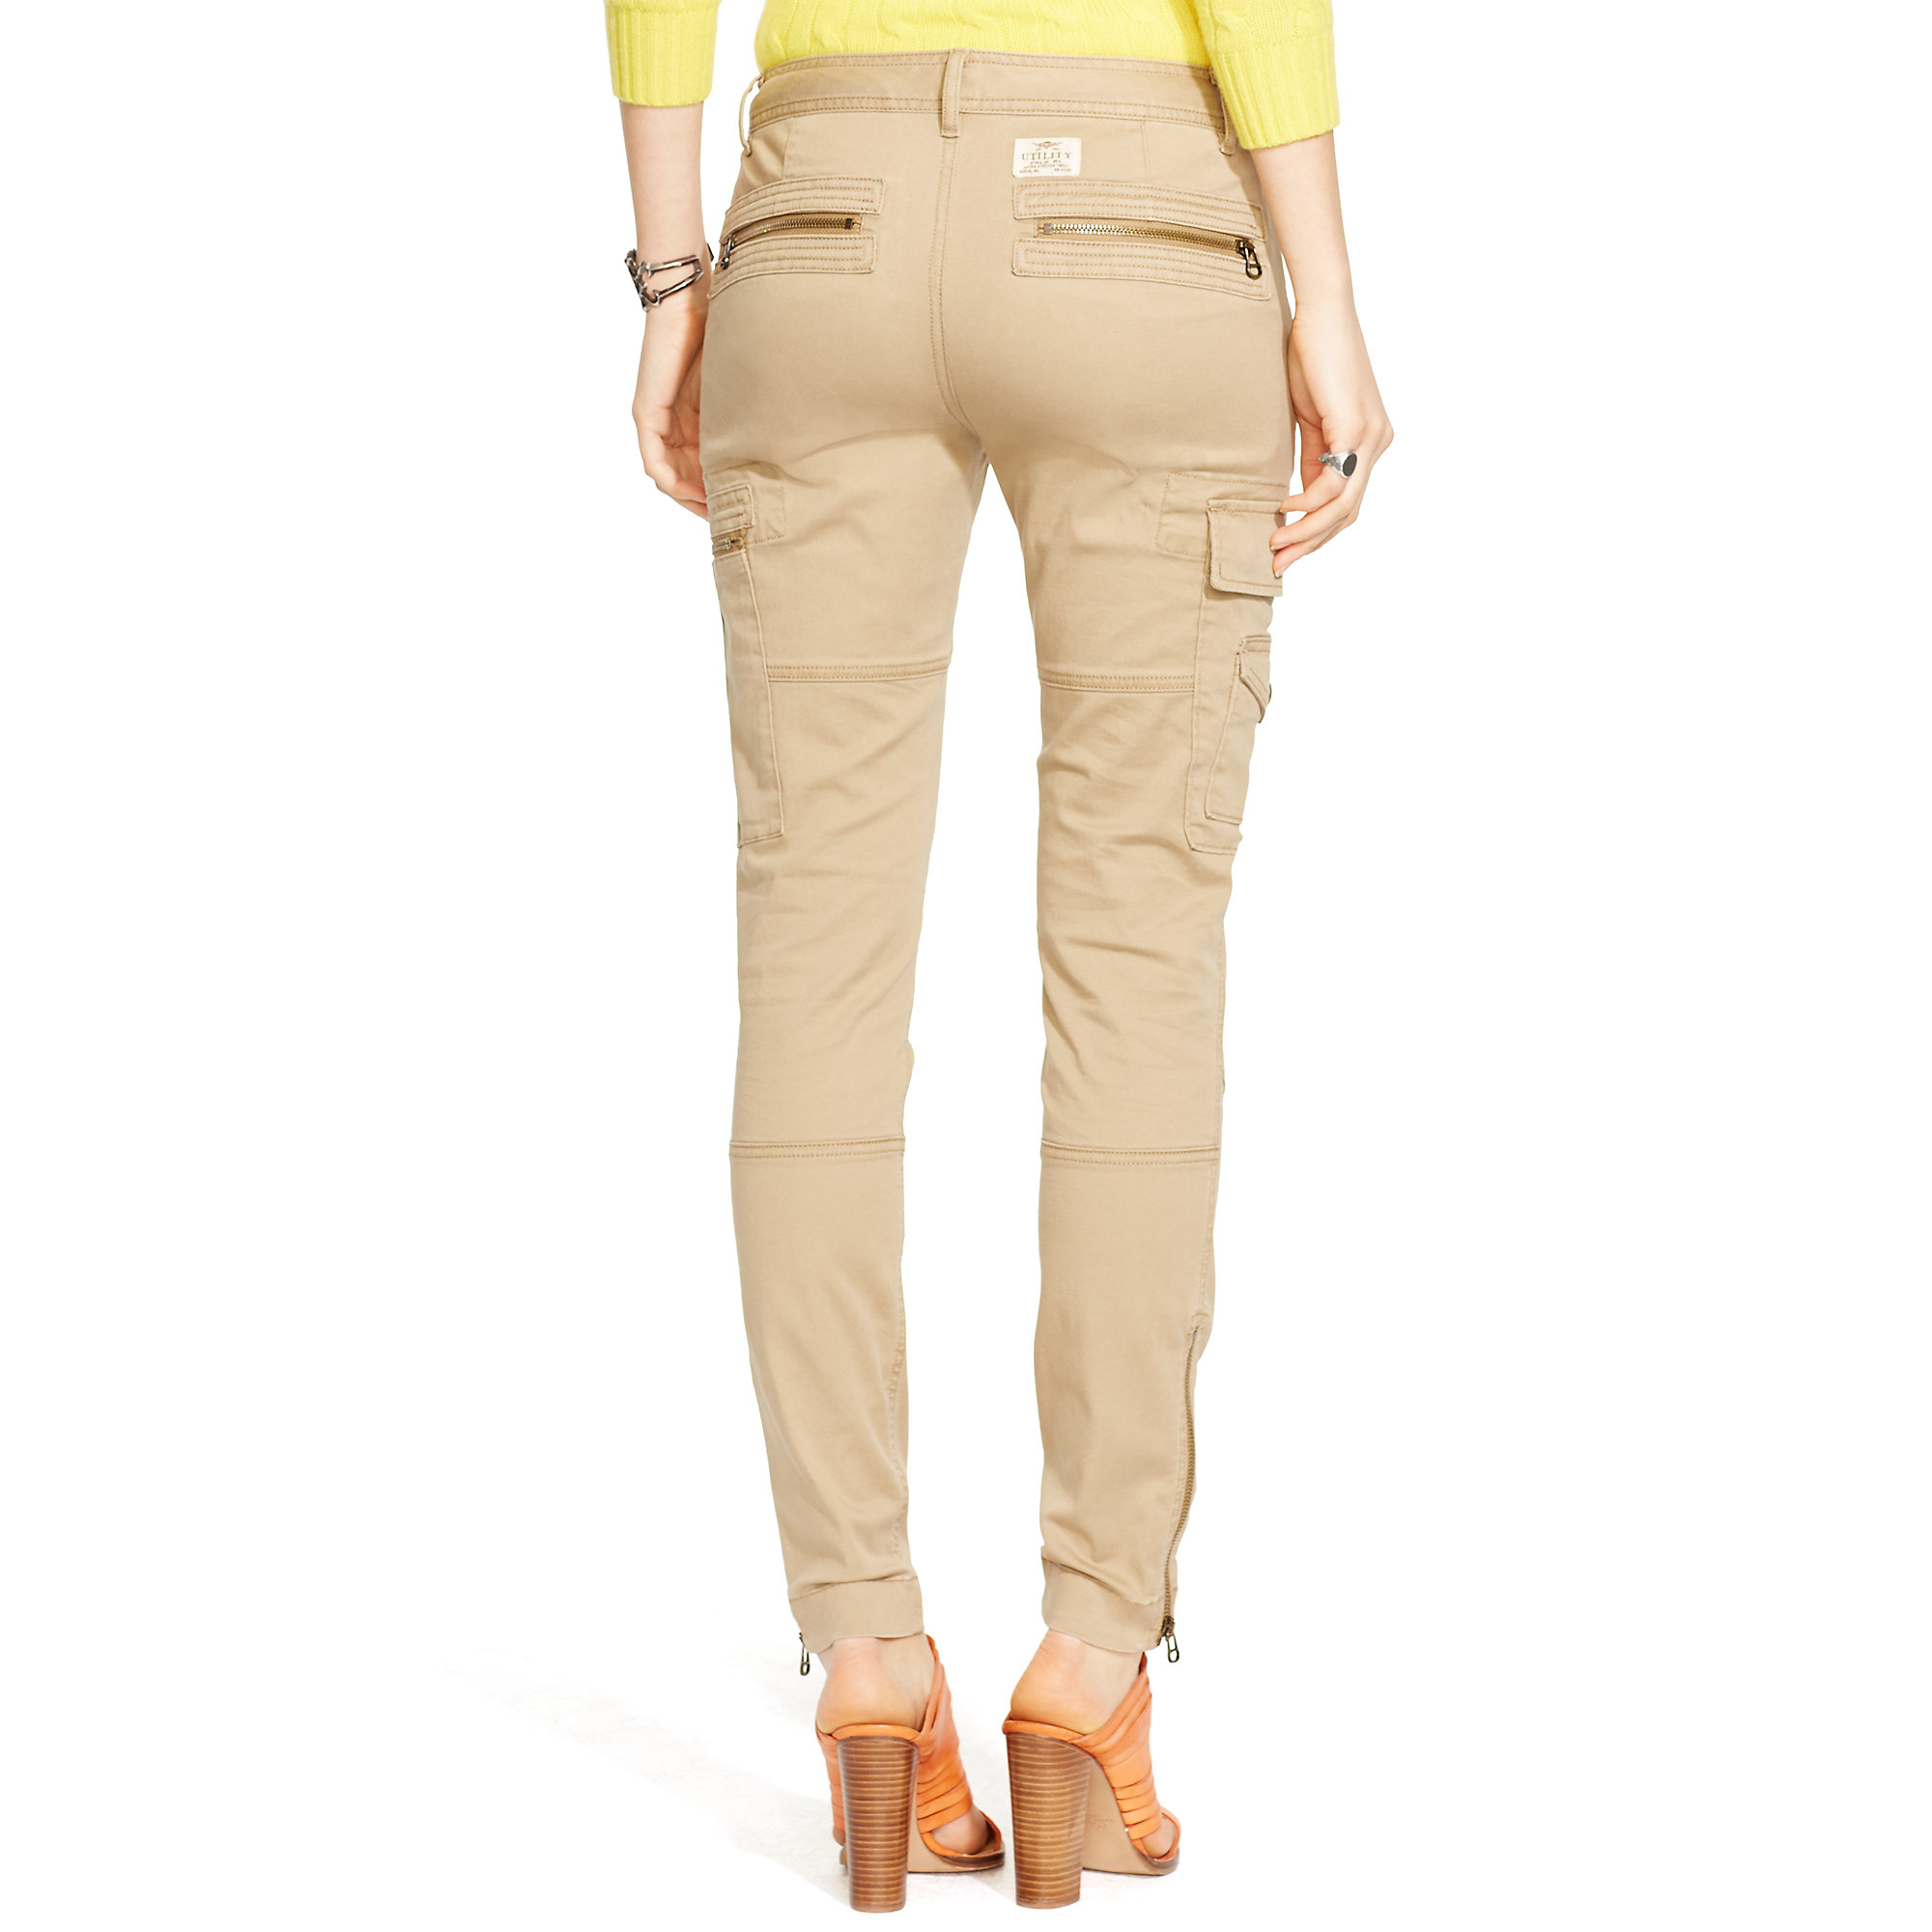 Lyst - Polo Ralph Lauren Stretch Skinny Cargo Pant in Natural